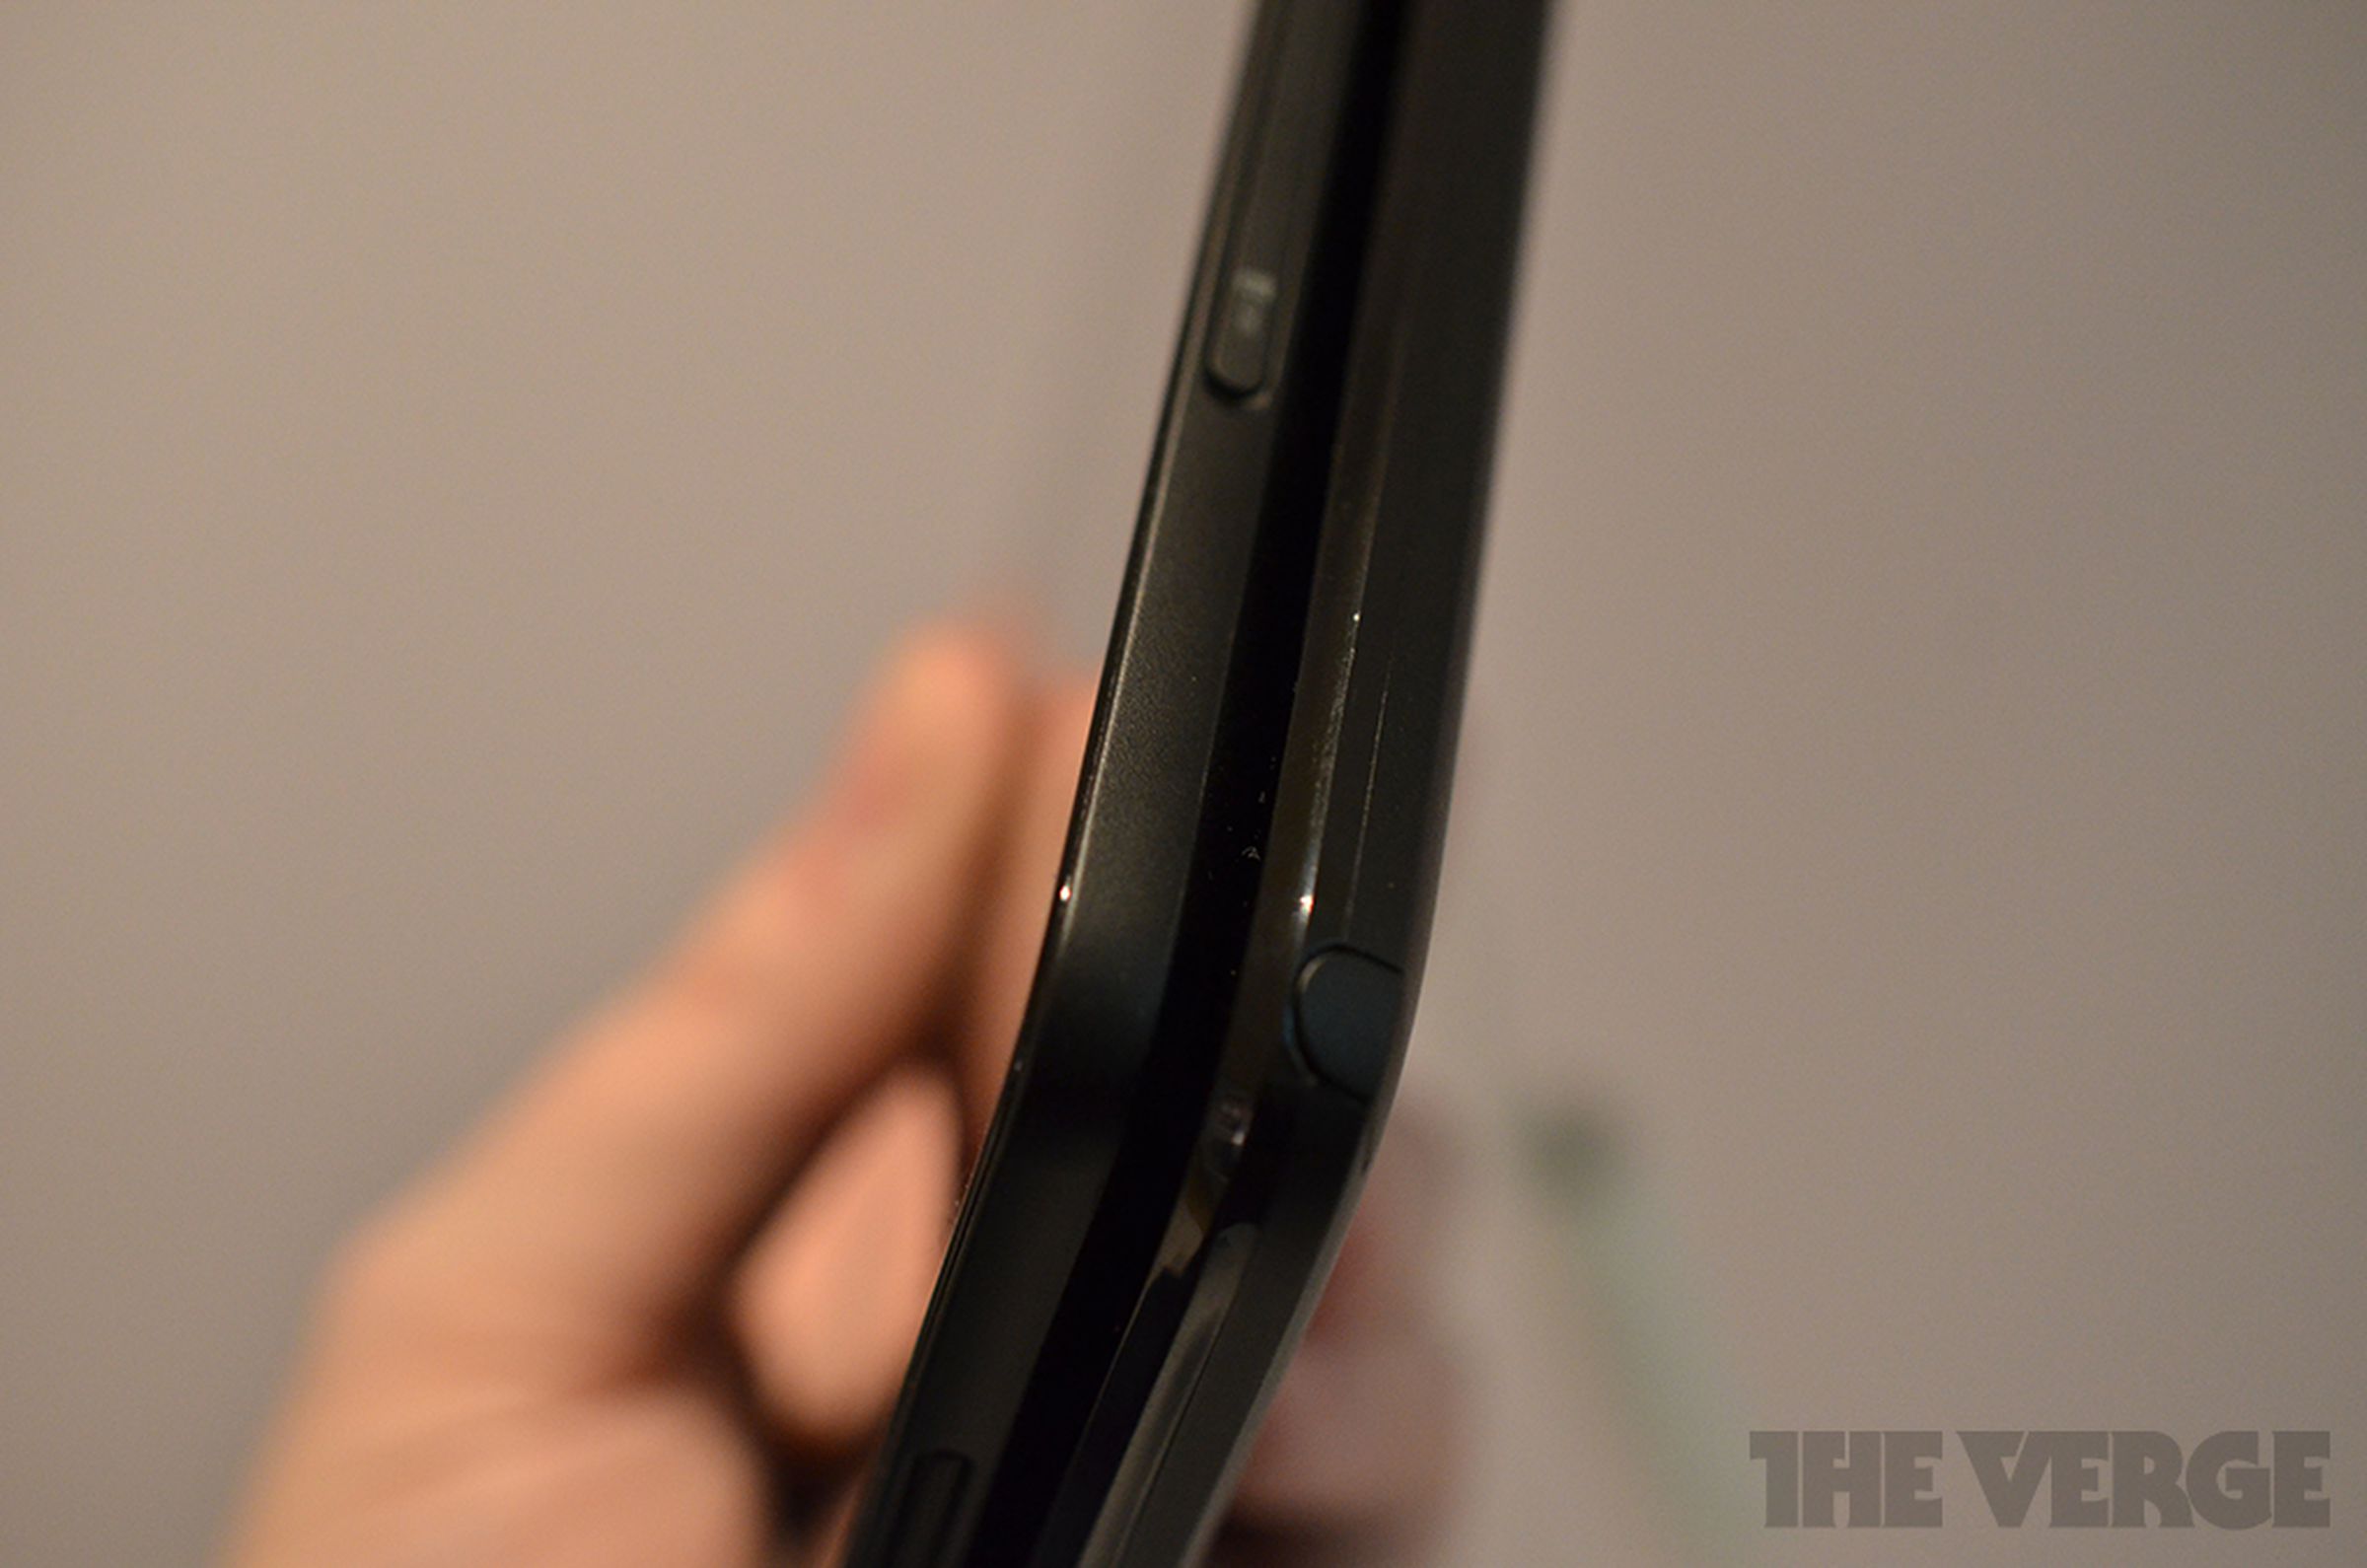 Asus VivoTab Note 8 hands-on photos